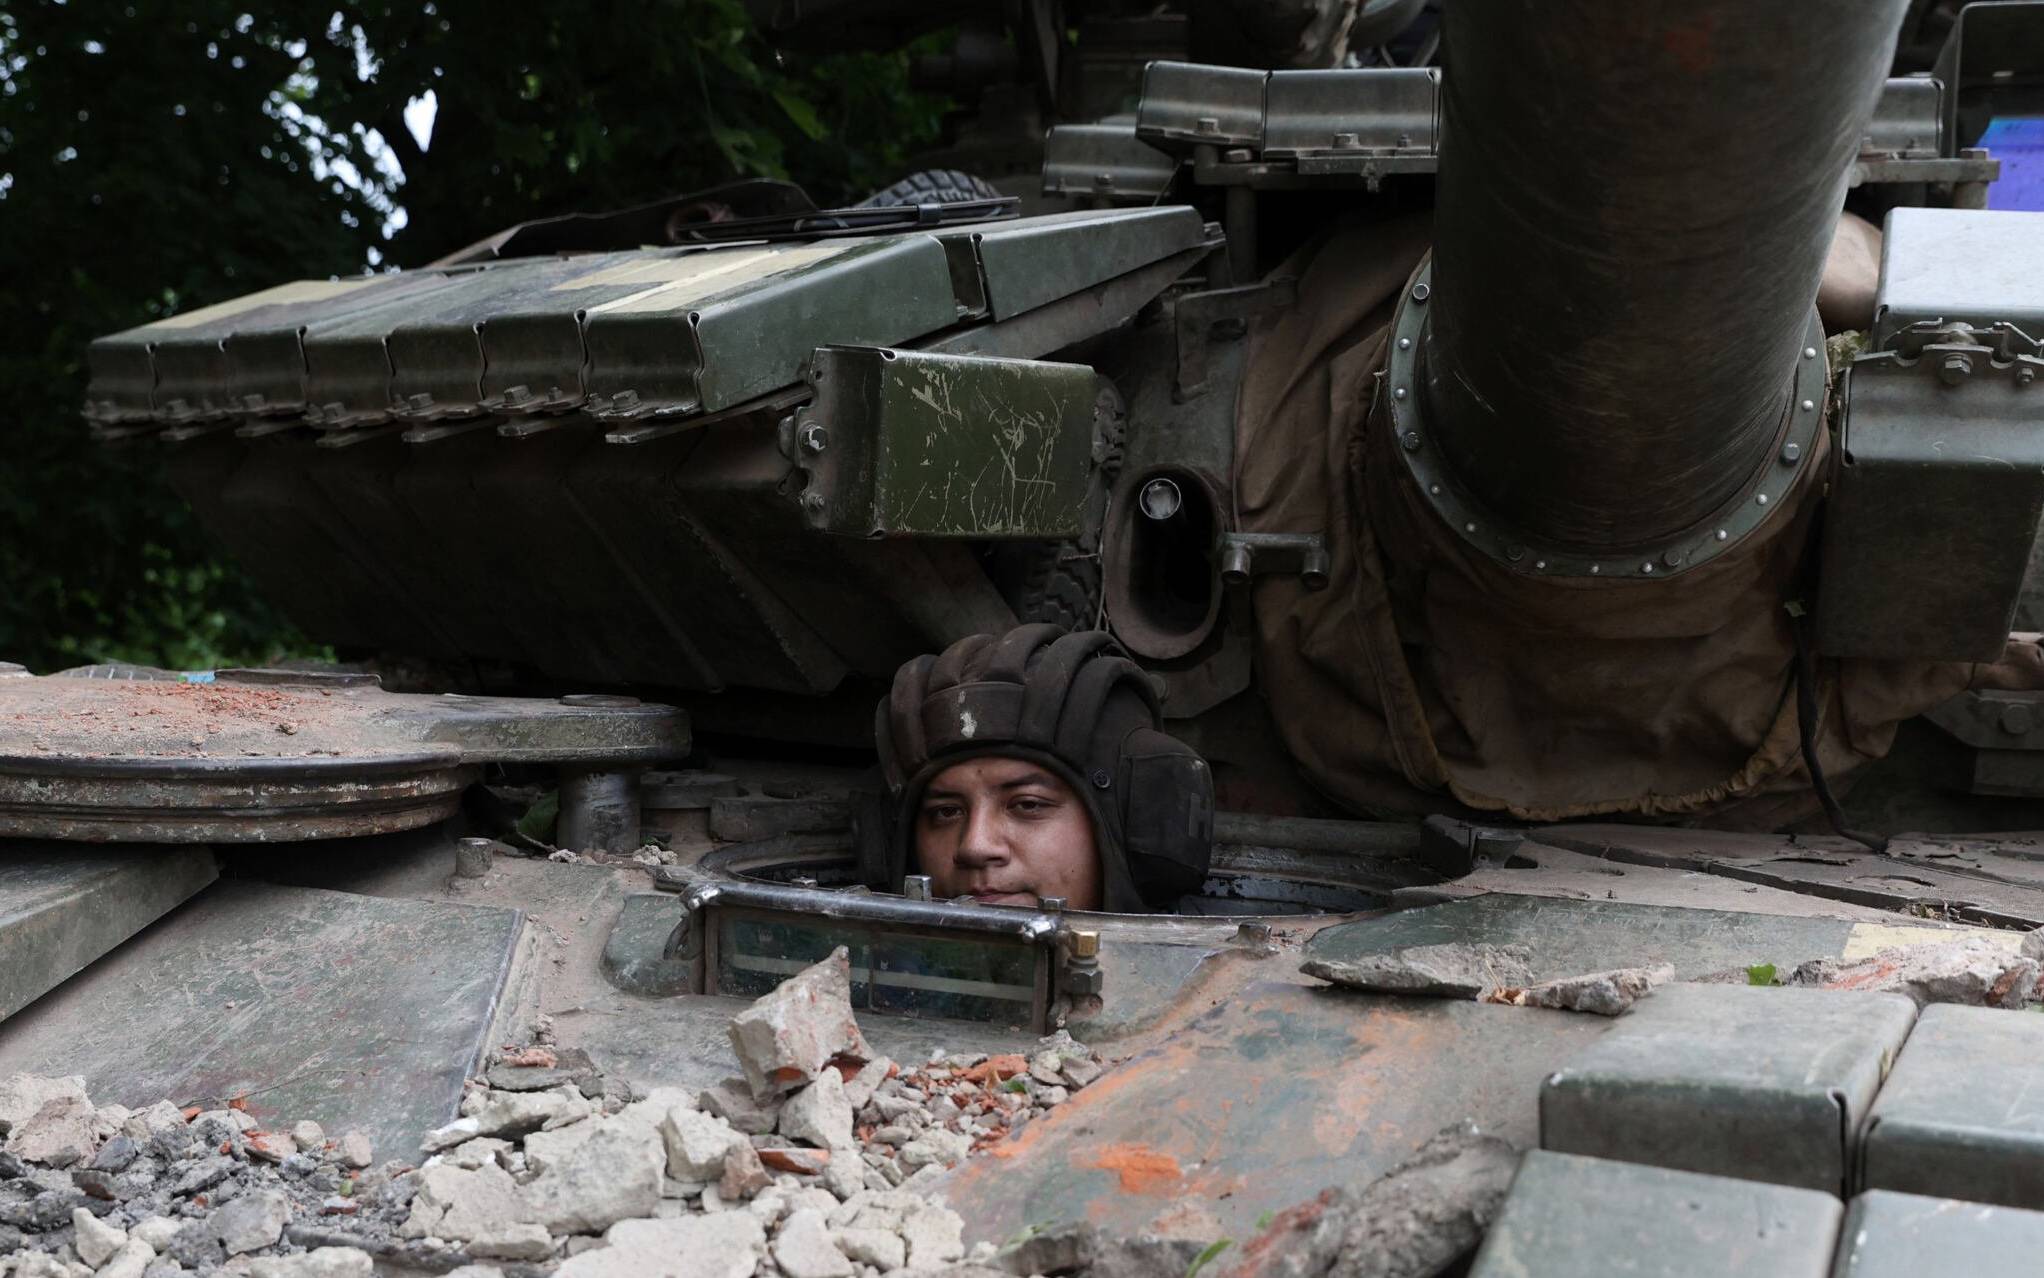 A Ukrainian serviceman peers out from a tank at a front line position near Kostyantynivka, Donetsk region on June 18, 2022, amid the Russian invasion of Ukraine. (Photo by Anatolii STEPANOV / AFP)